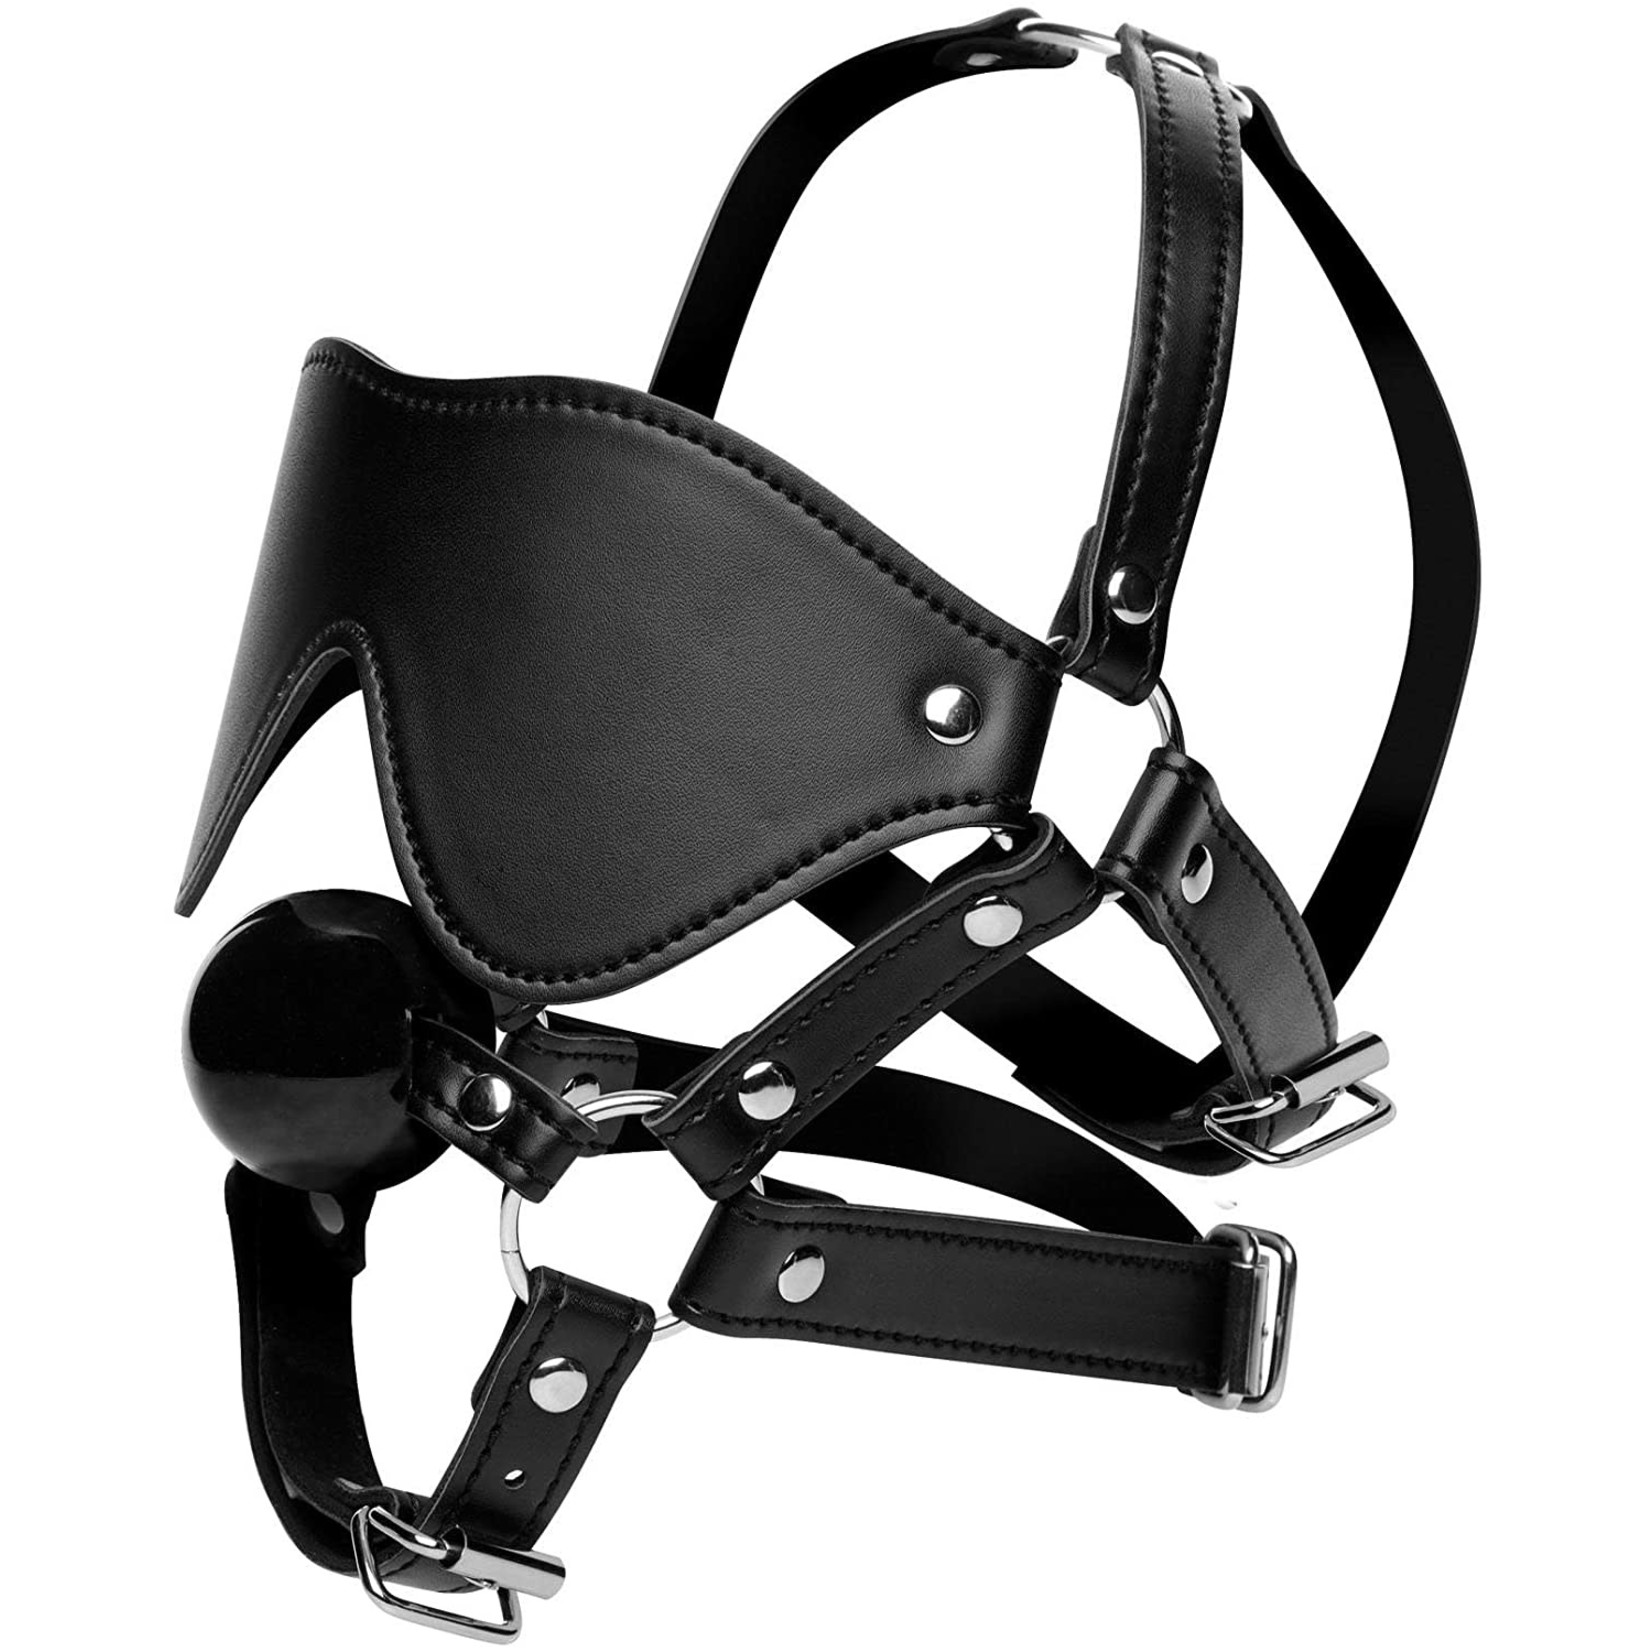 STRICT STRICT BLINDFOLD HARNESS AND BALL GAG - RED